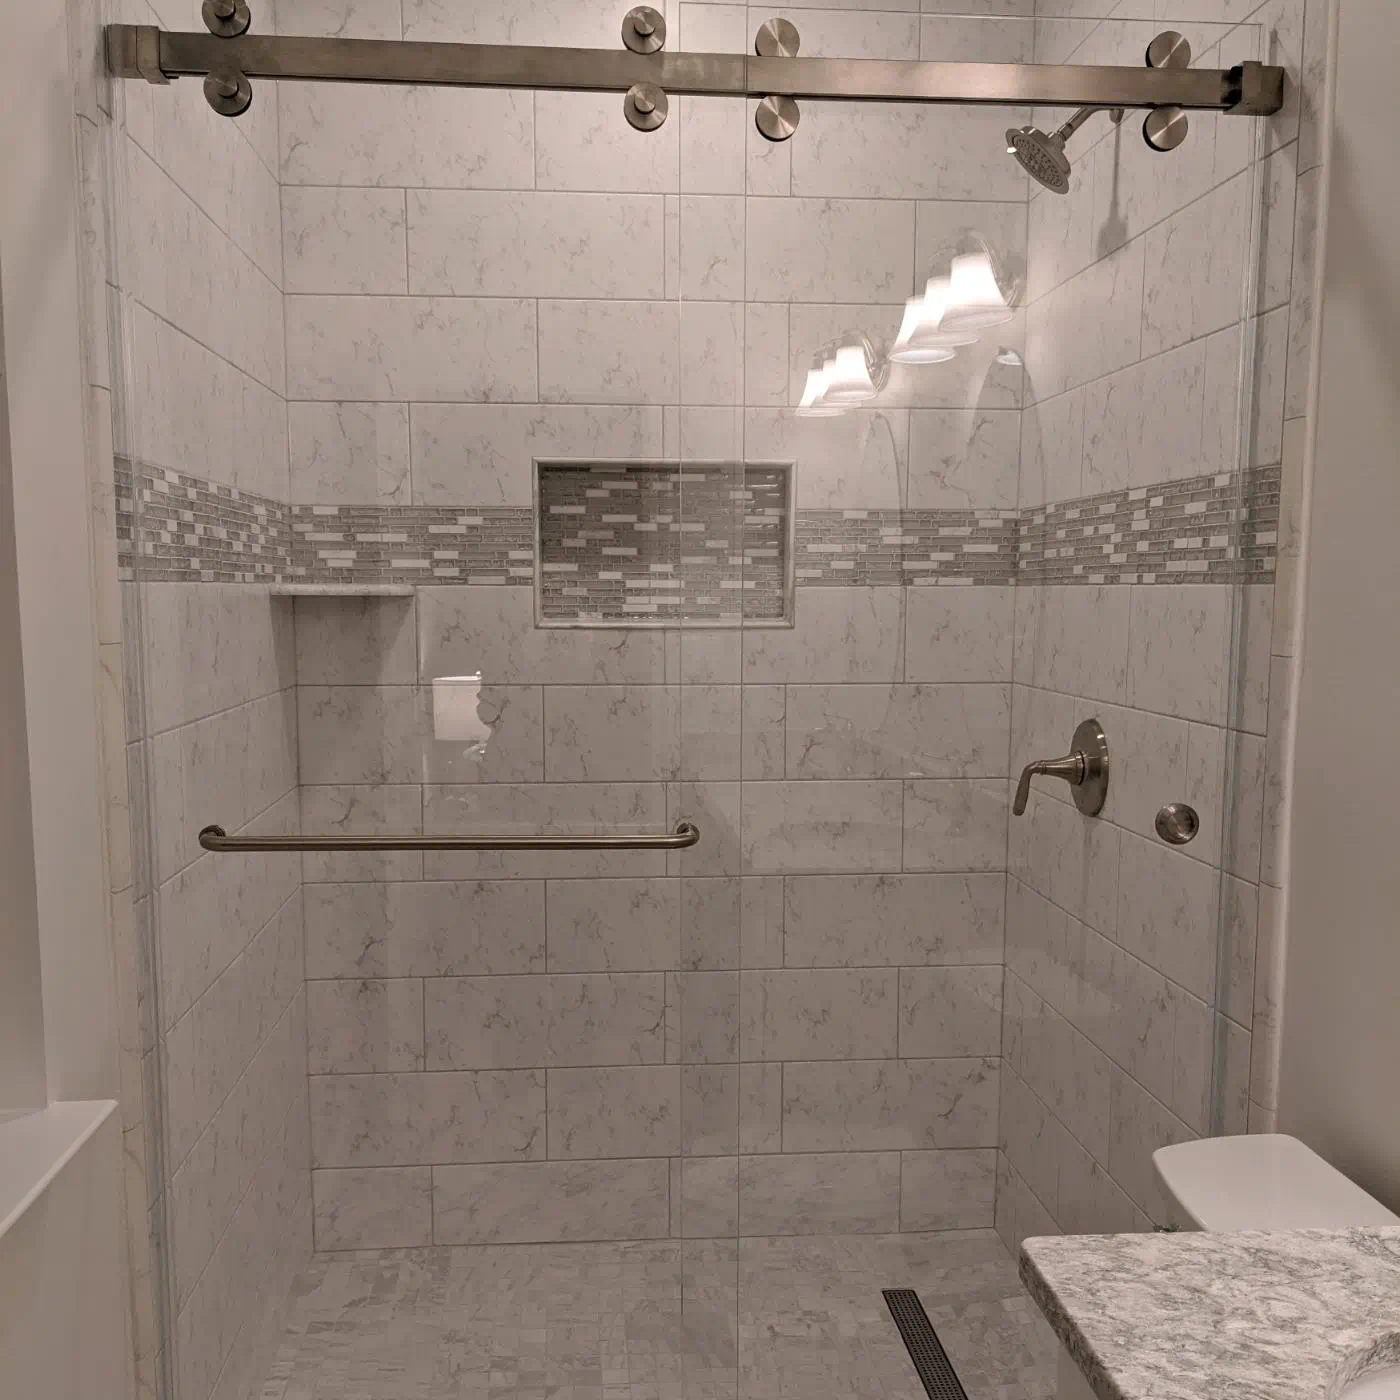 An image of a shower project in a bathroom completed by ProSource of Dulles